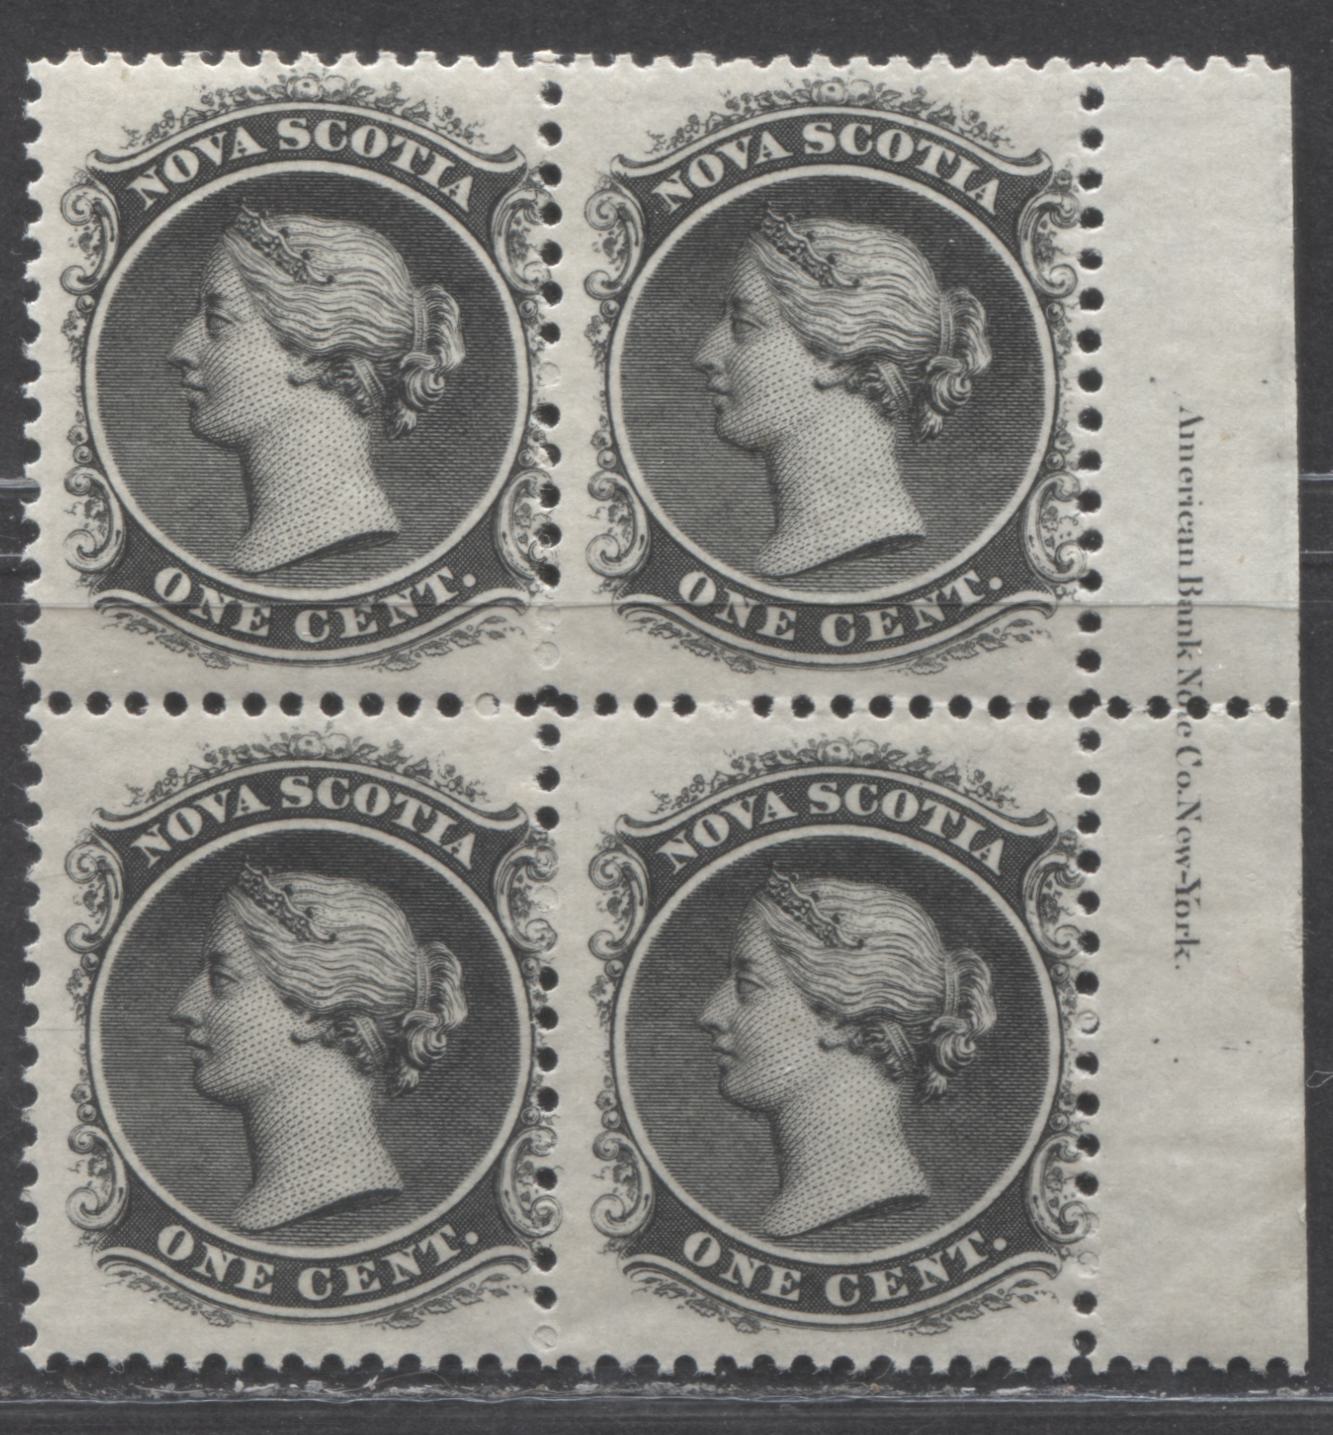 Lot 72 Nova Scotia #8a 1c Black Queen Victoria, 1860-1863 First Cents Issue, A VFNH Imprint Block Of 4 On White Paper, Perf 12 x 11.75